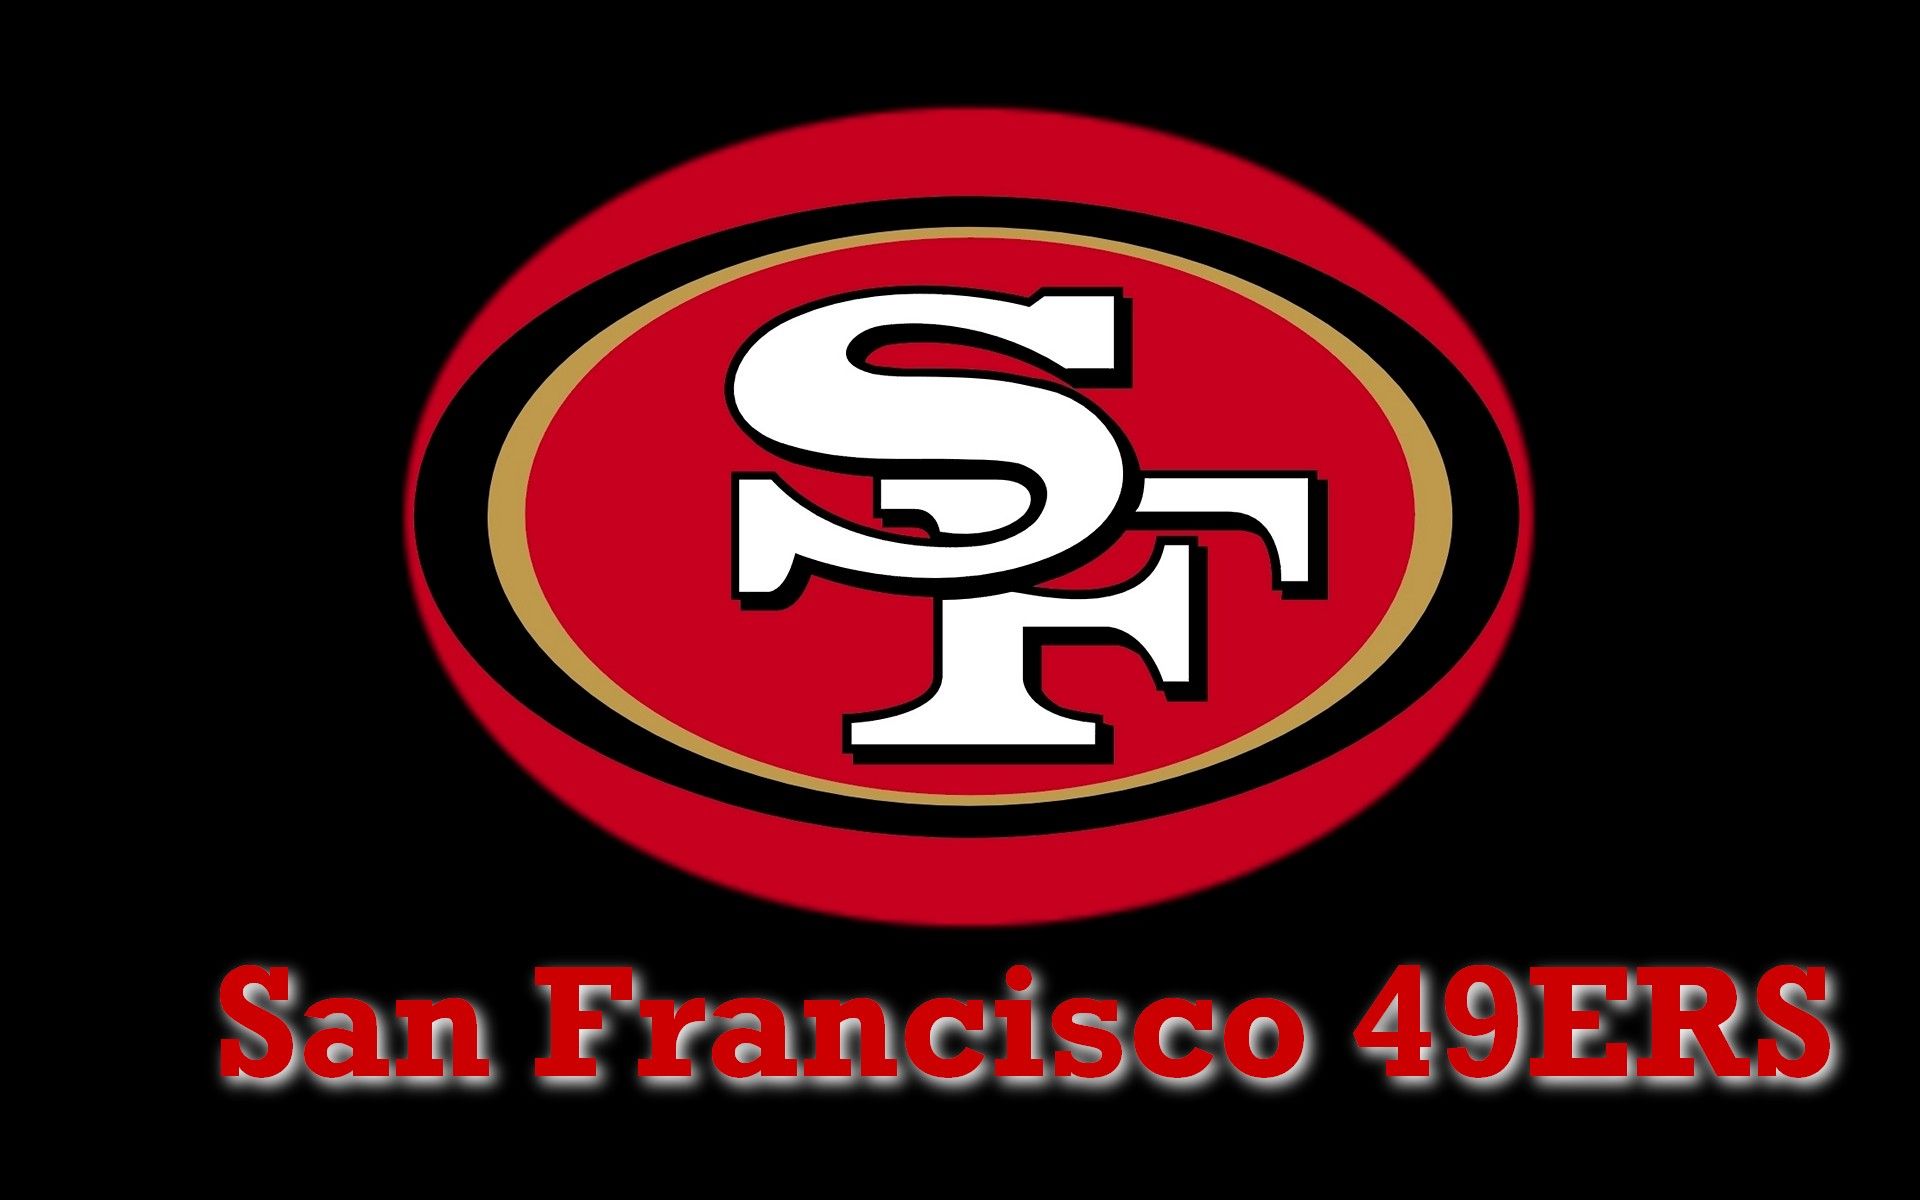 San Francisco 49ers Wallpapers 546 Wallpaper All Best Image